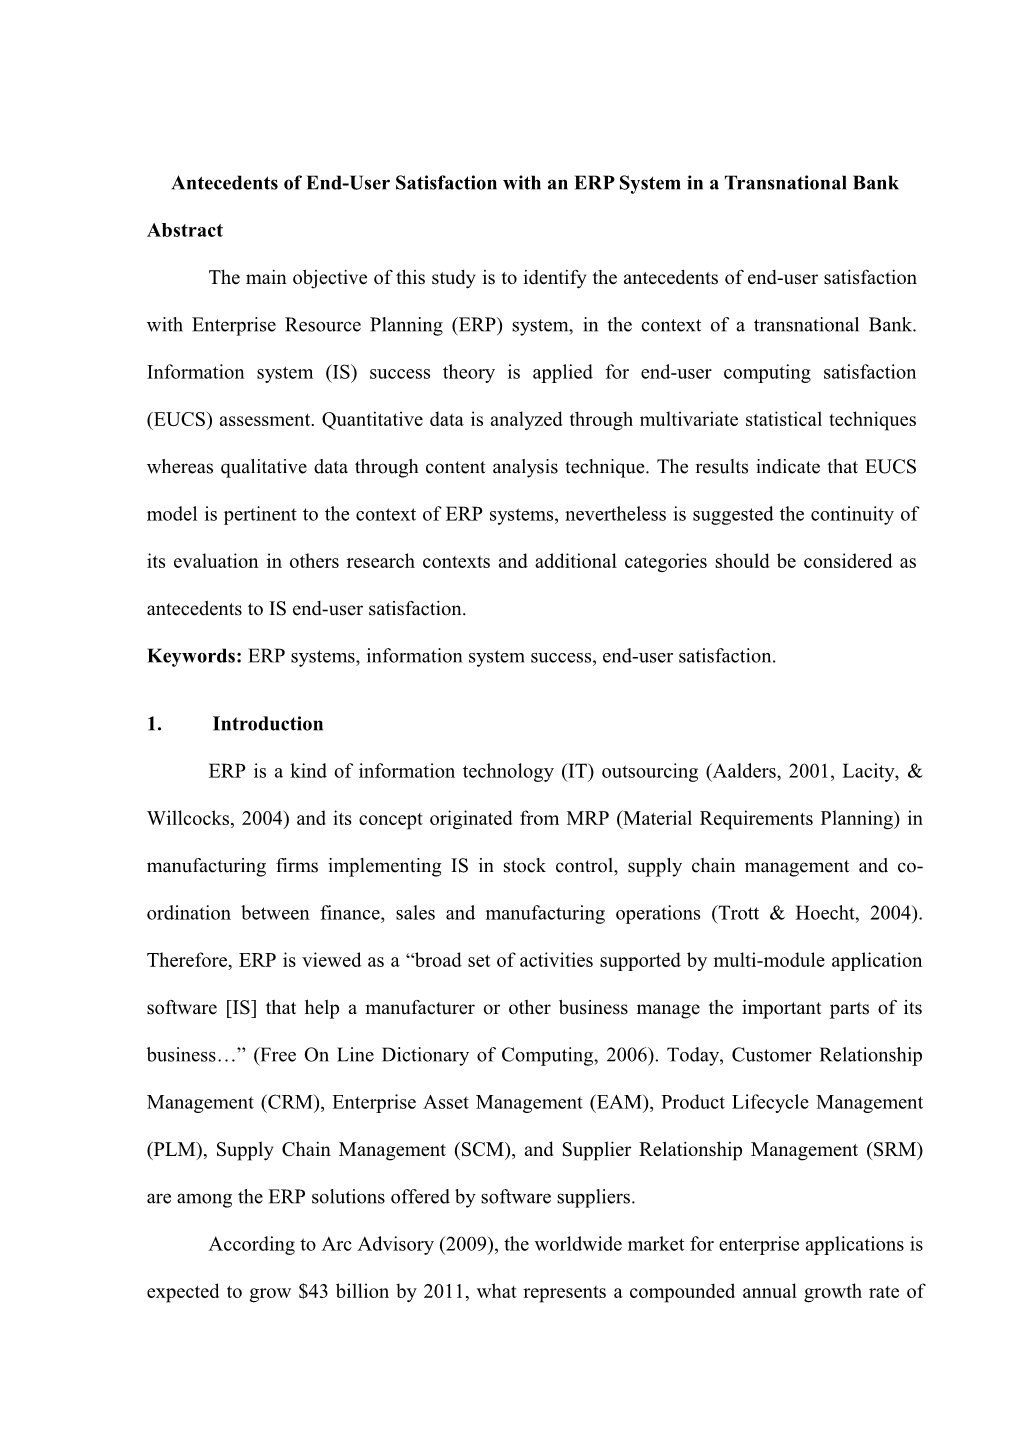 Antecedents of End-User Satisfaction with an ERP System in a Transnational Bank